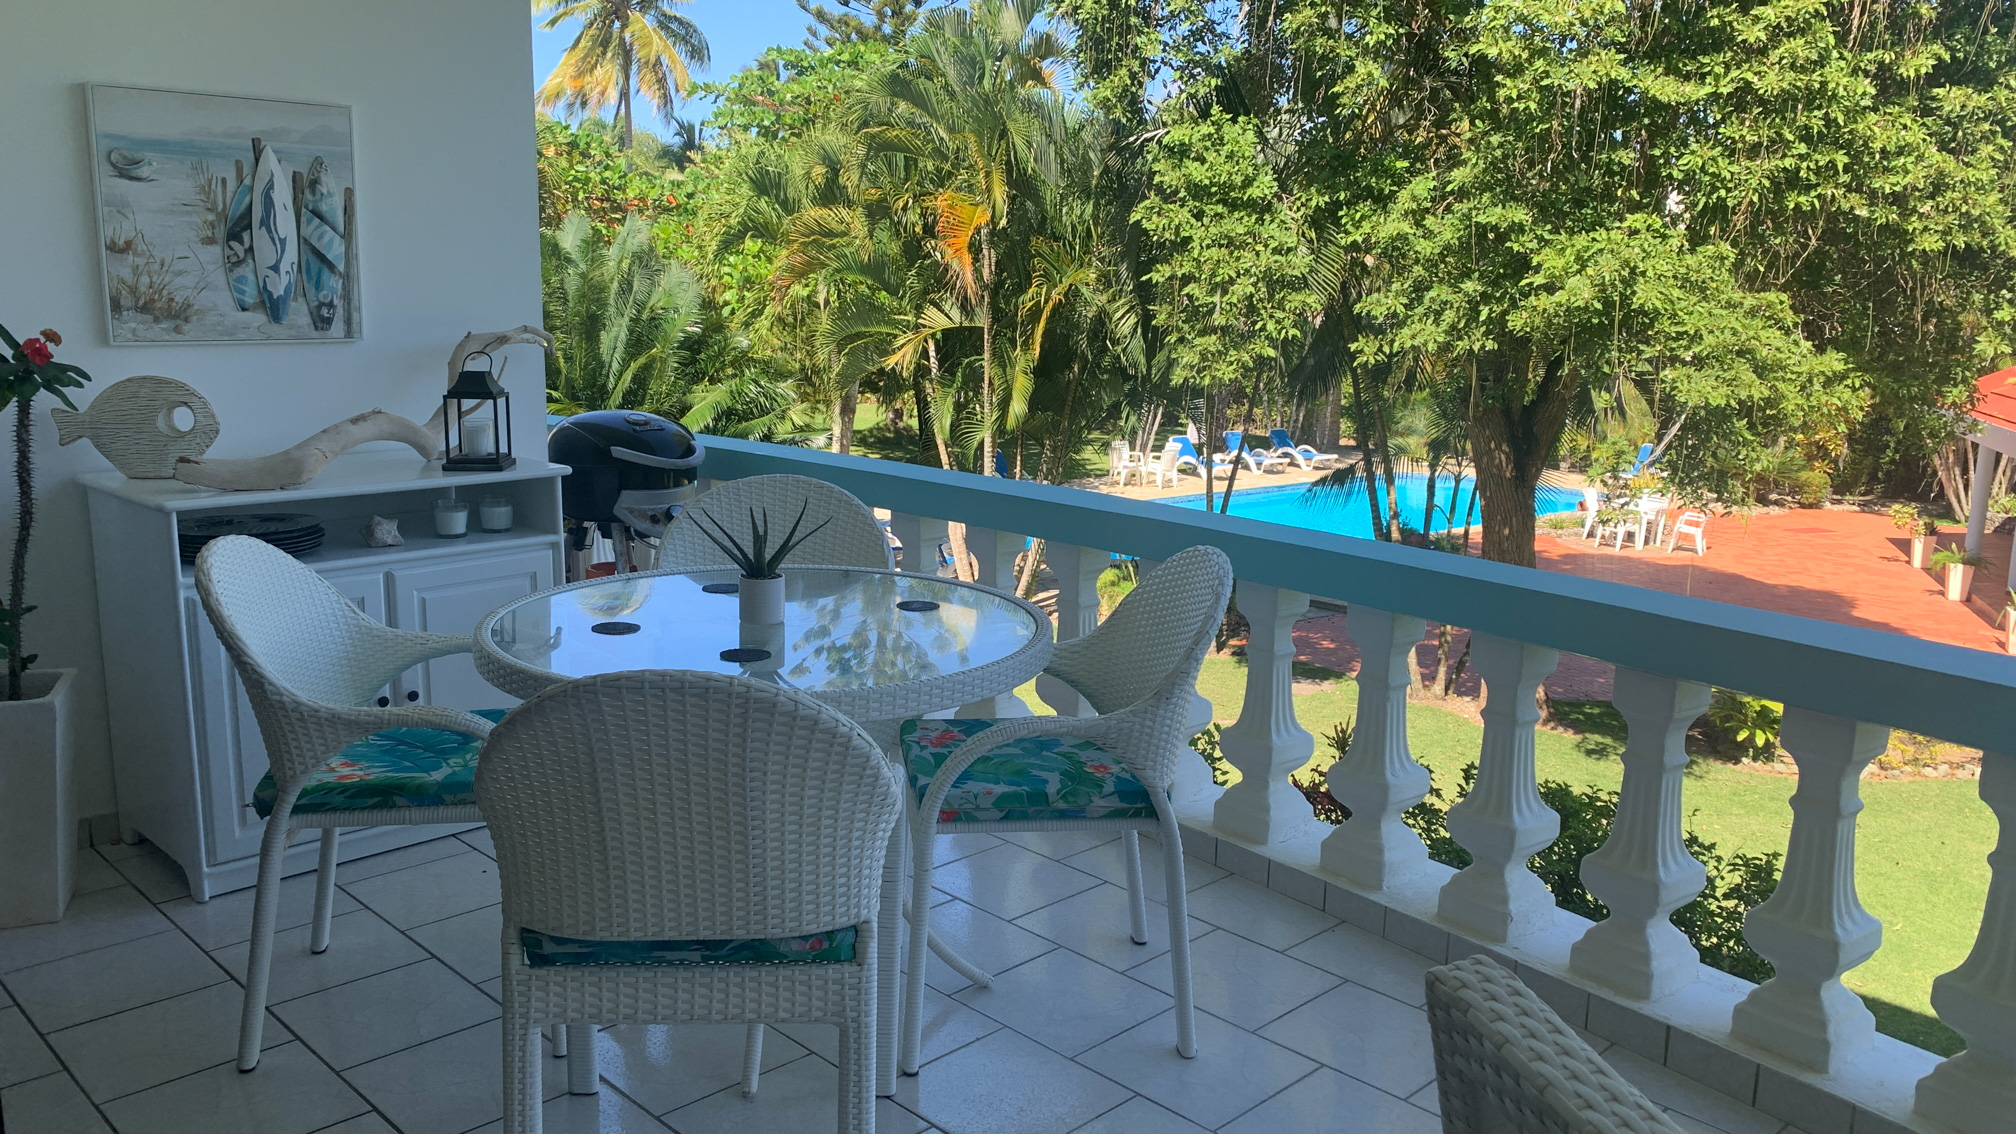 Located east of Cabarete, Complex on the Beach